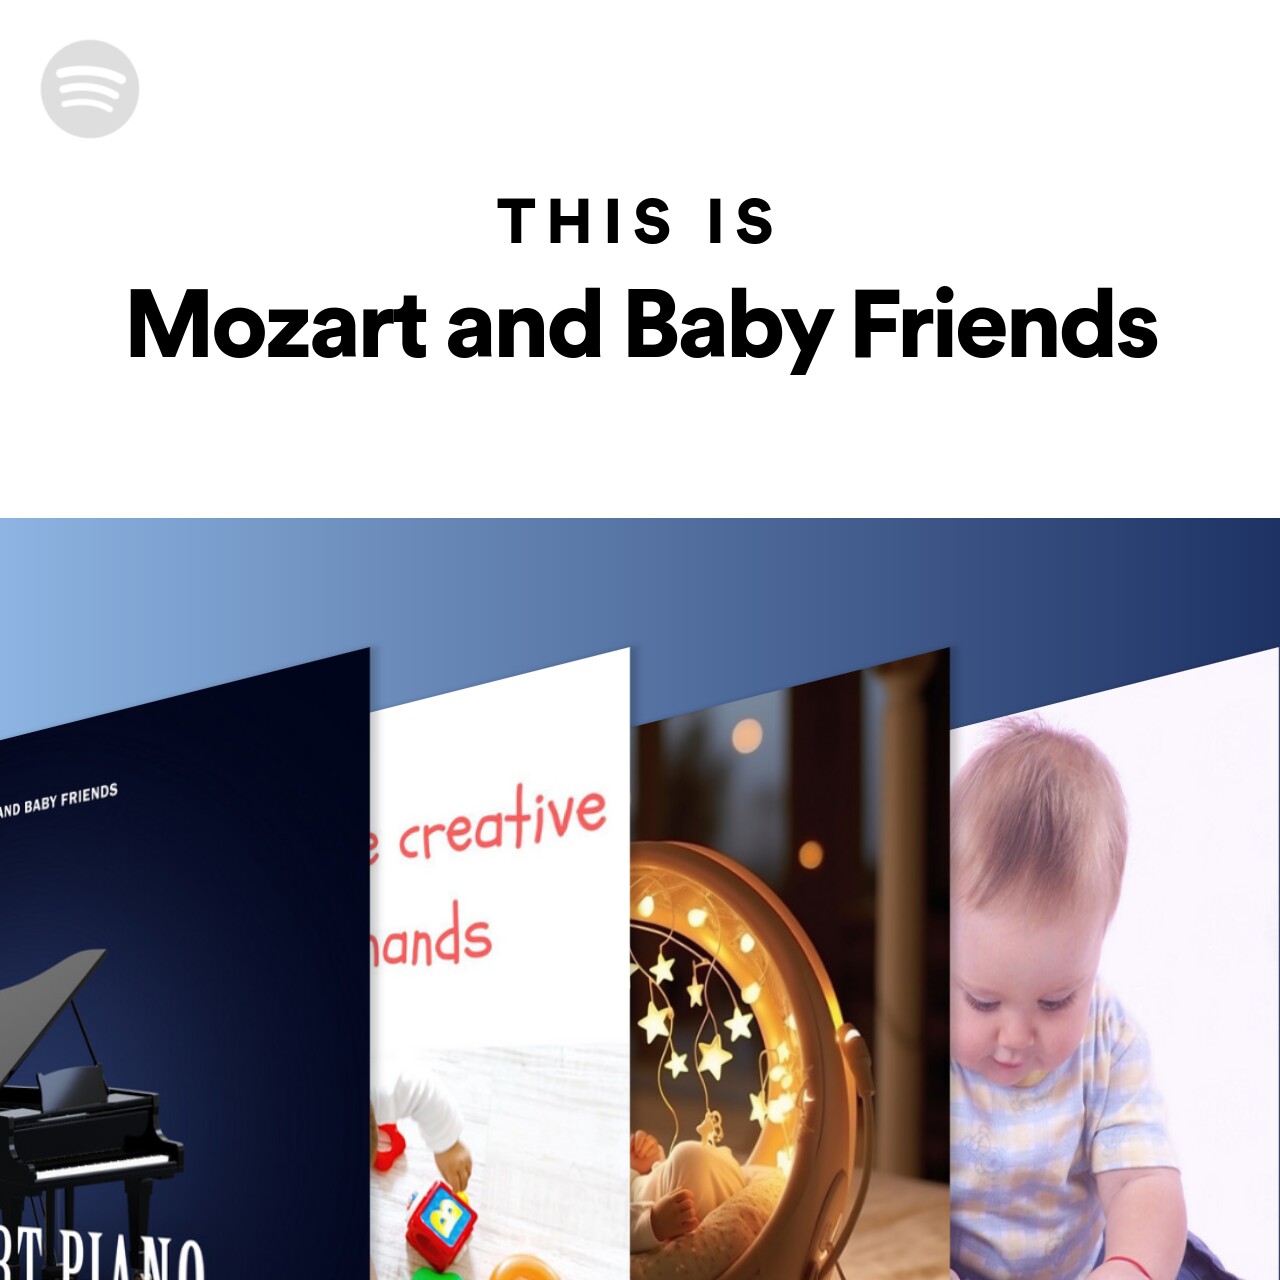 This Is Mozart and Baby Friends